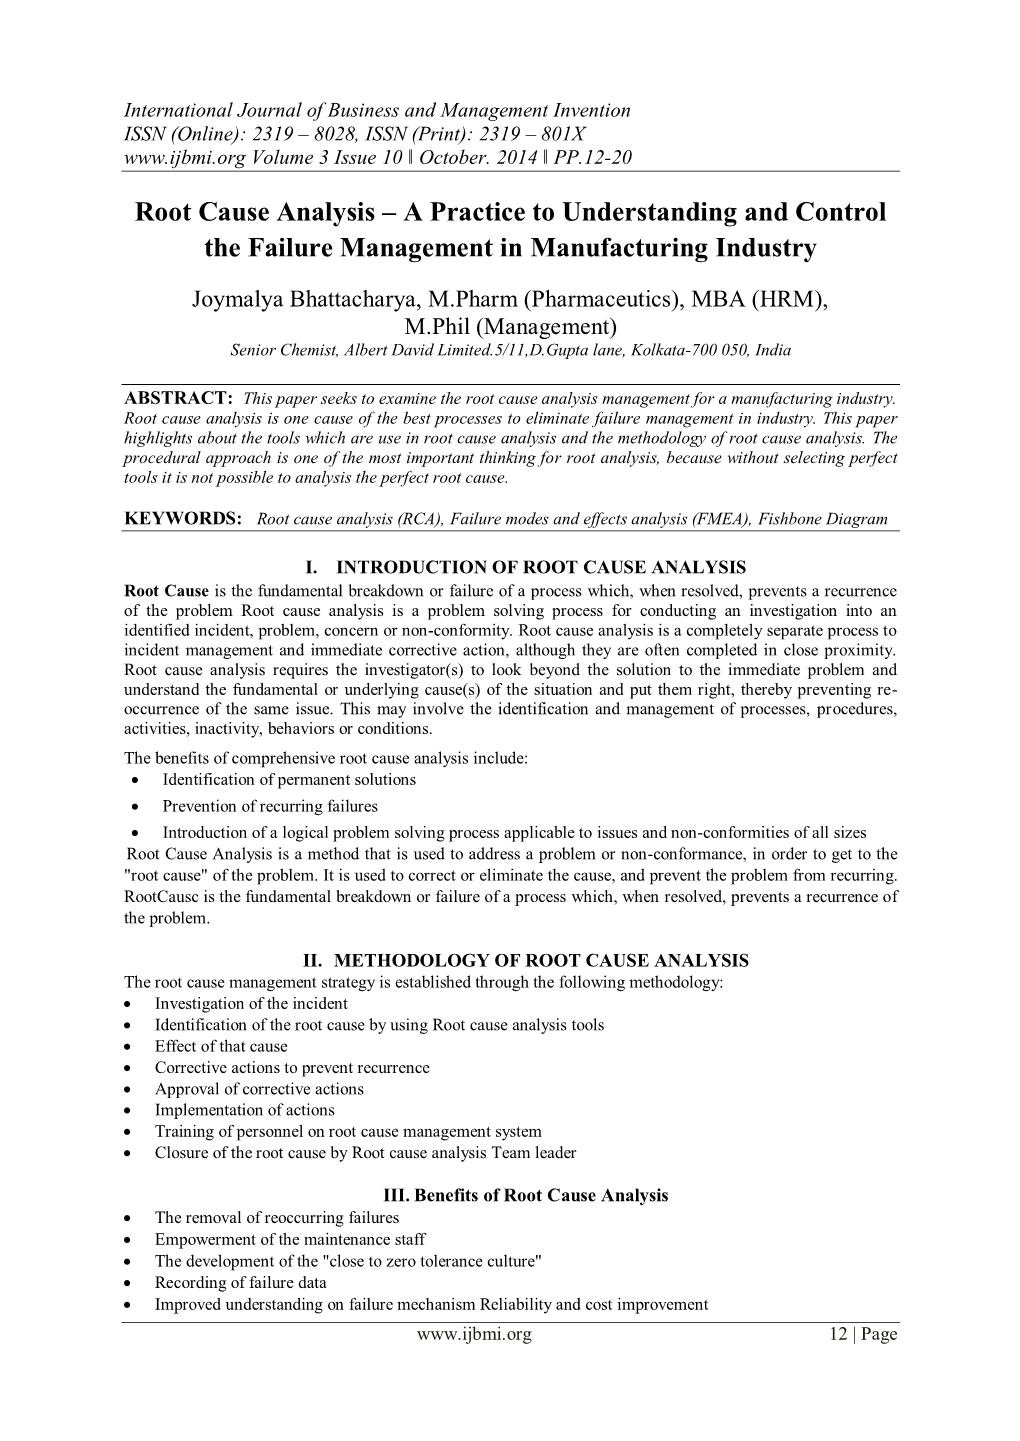 Root Cause Analysis – a Practice to Understanding and Control the Failure Management in Manufacturing Industry